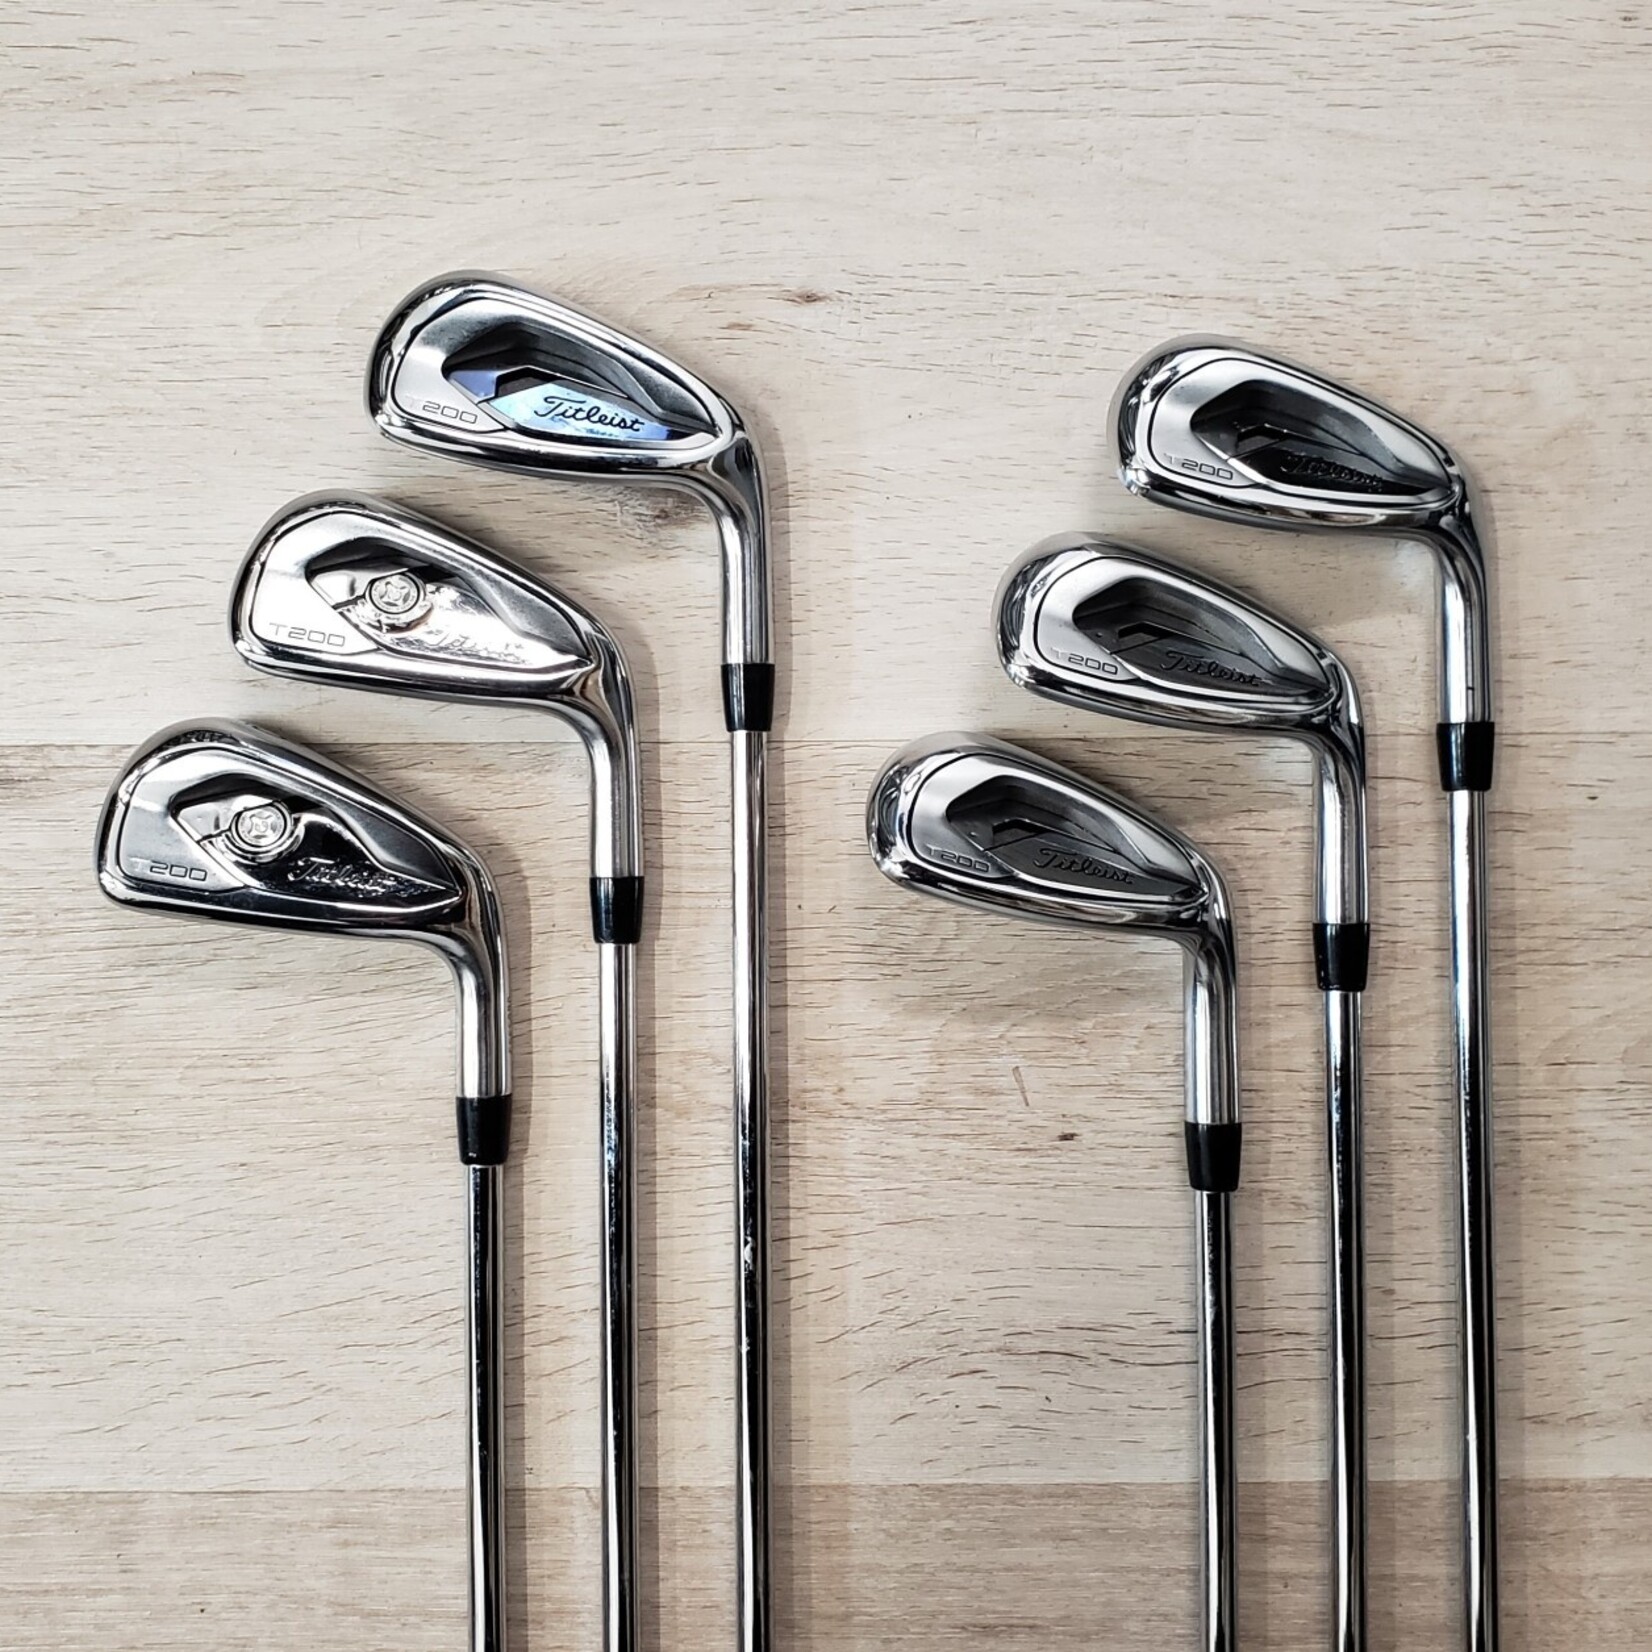 Pre-owned) Titleist T200 Iron Set 6-PW, 48* AMT Red Regular Flex 